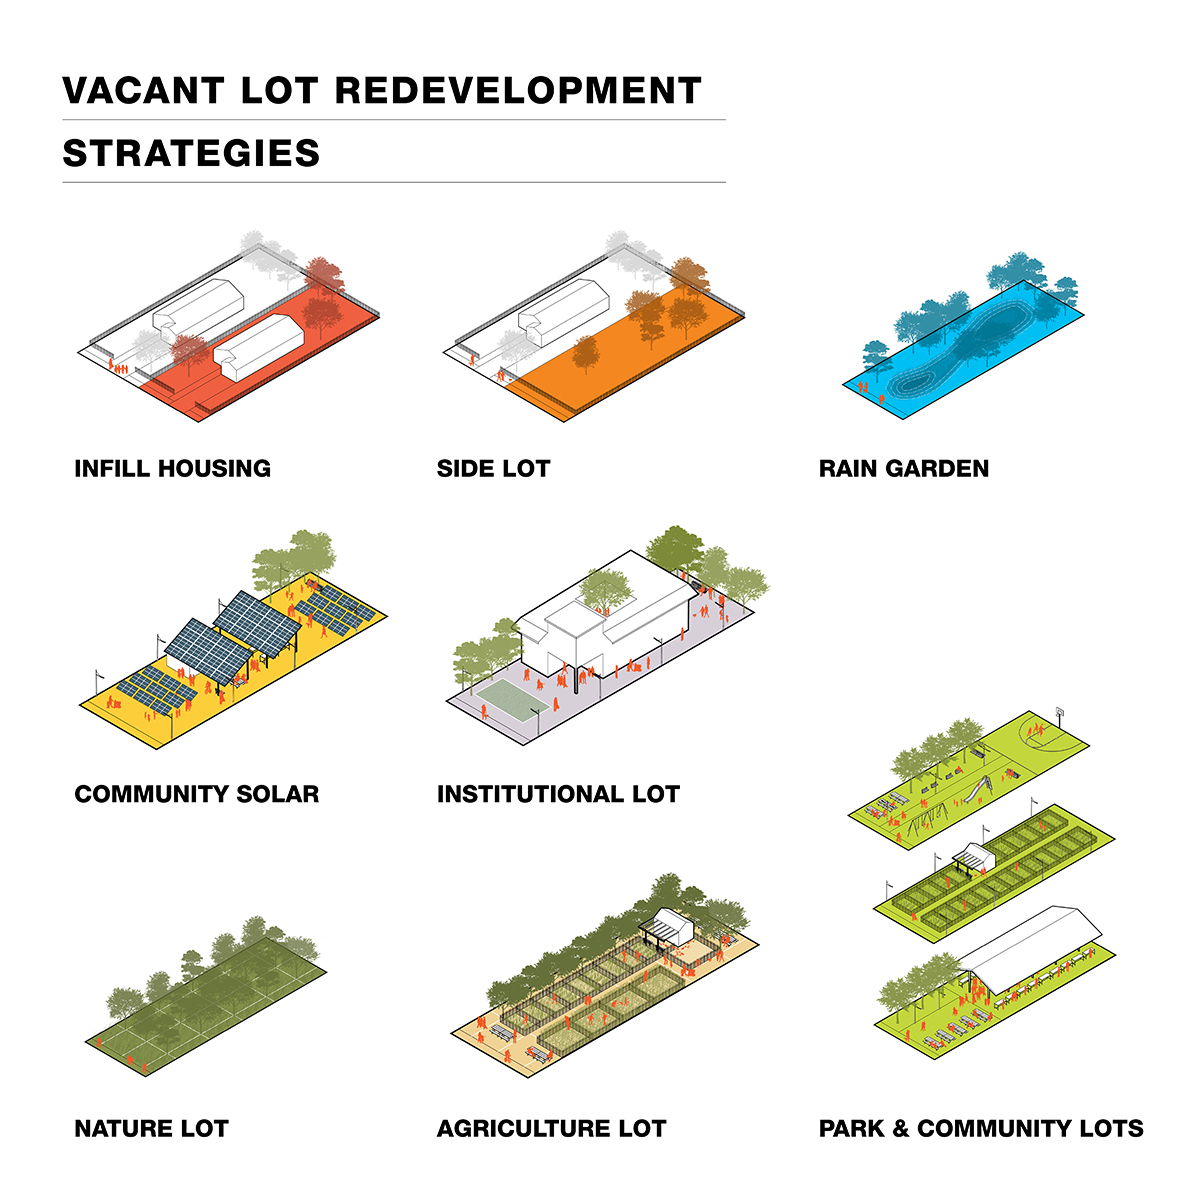 A rendering by Sasaki of vacant lot development strategies for the South Cypress Creek and West Junction Neighborhood Design Implementation. Vacant lot strategies include new renewable energy lots, green infrastructure lots, and park lots.